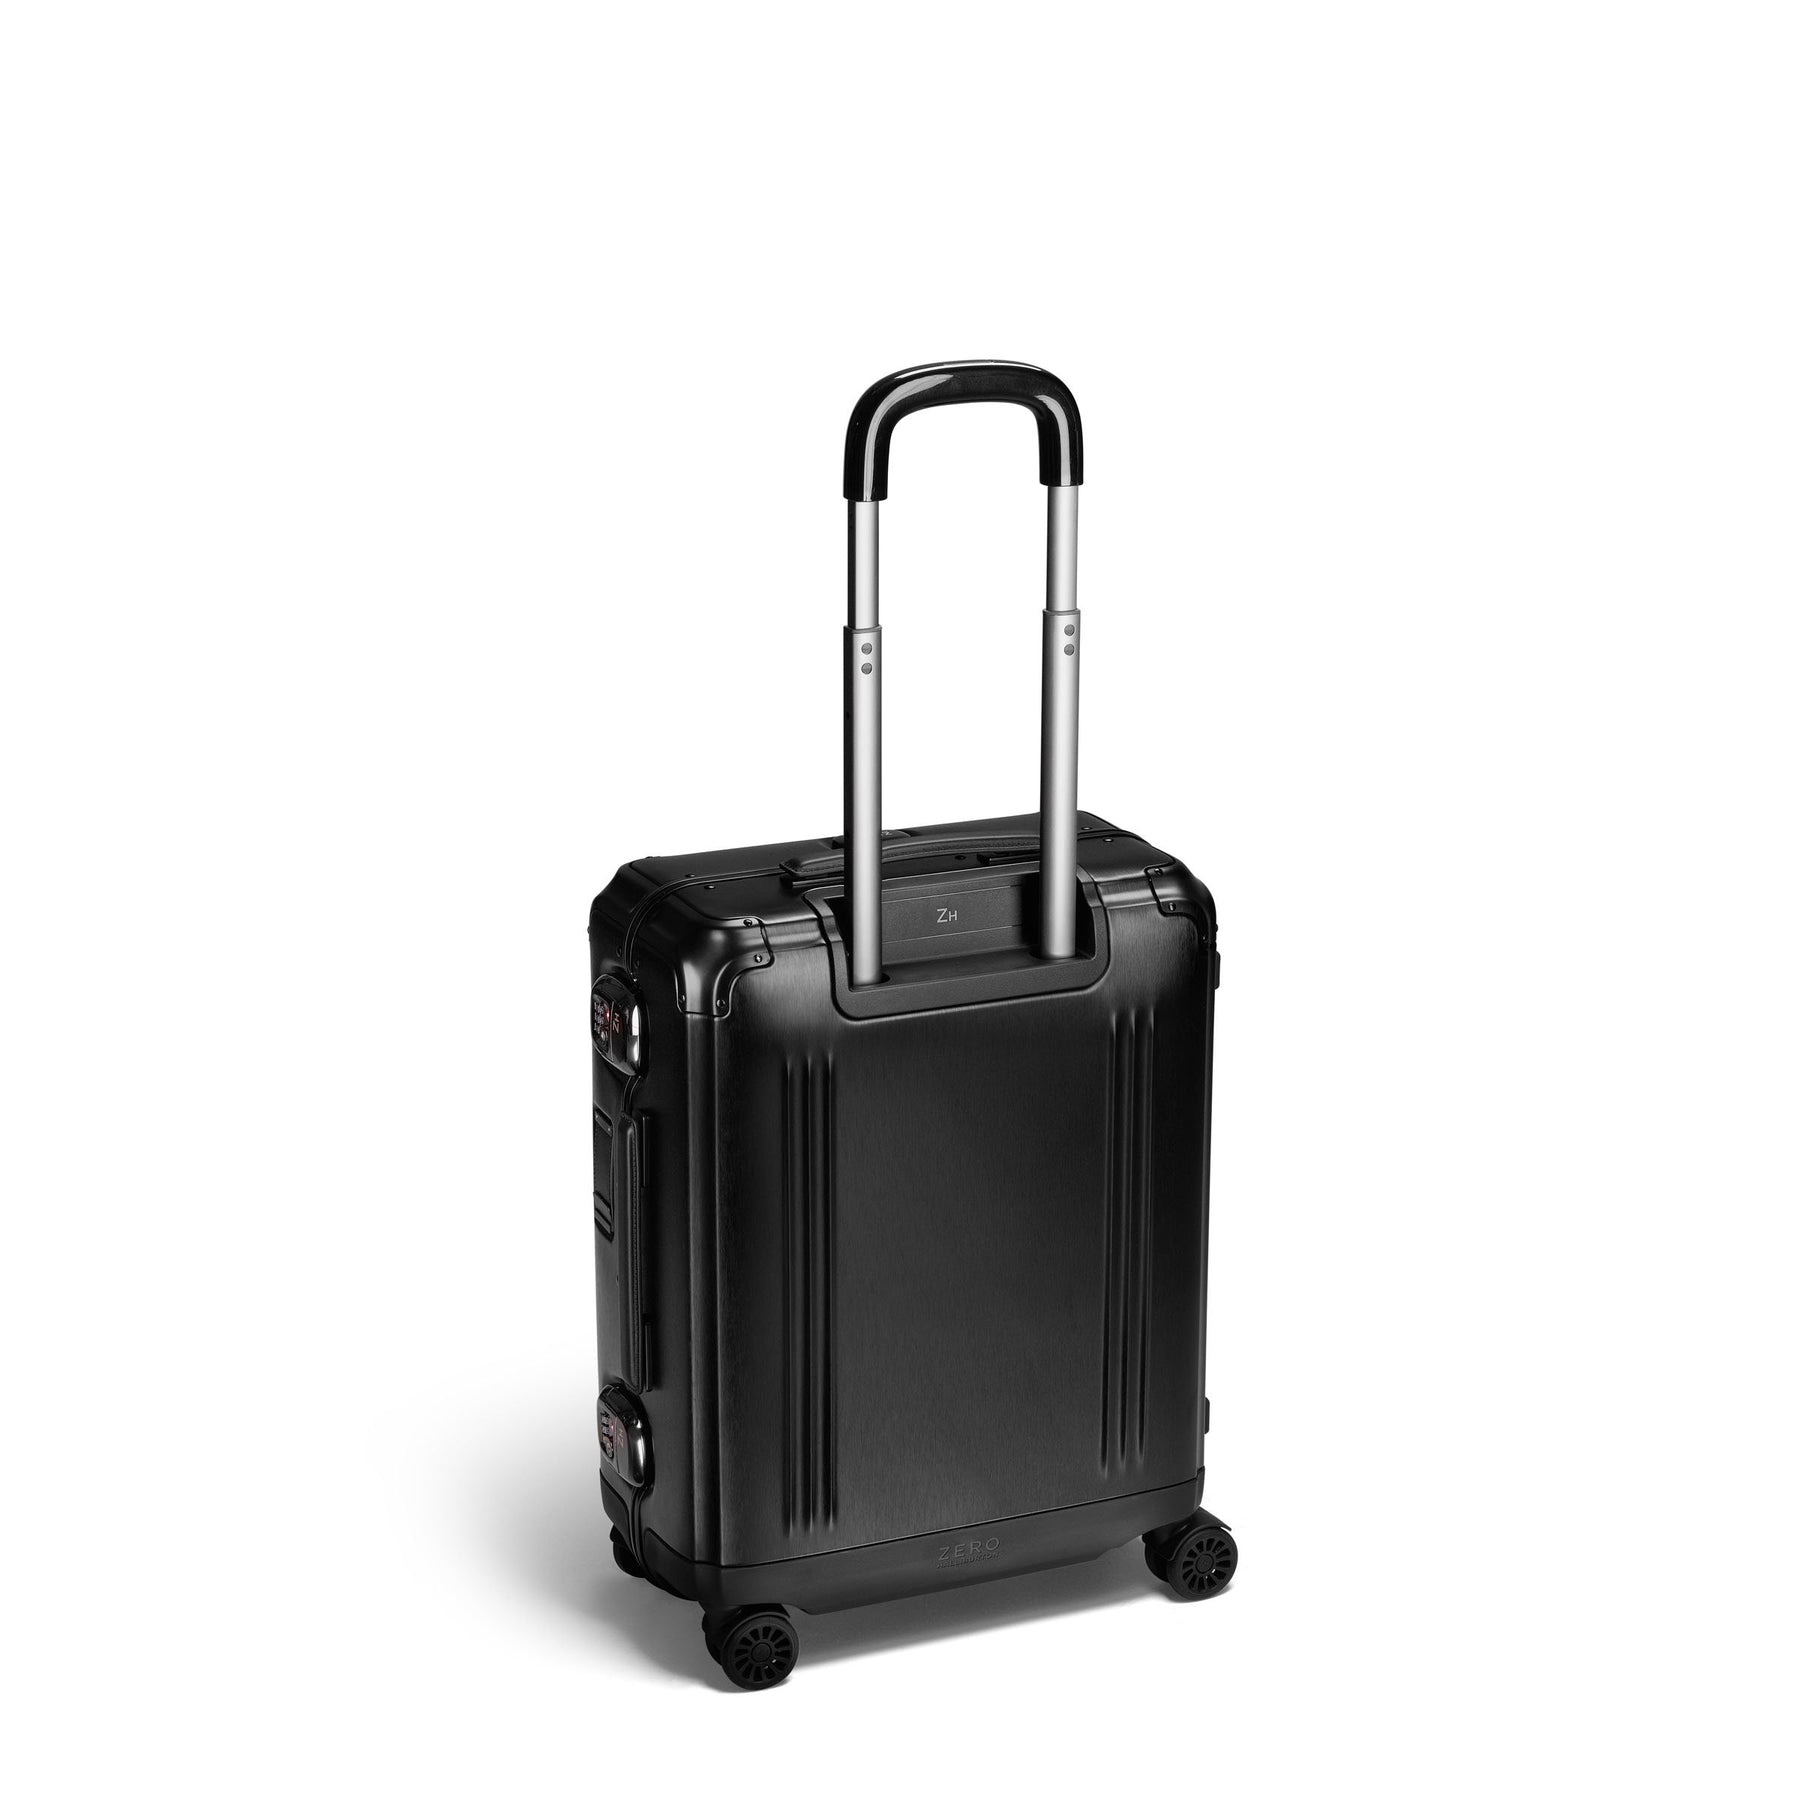 Pursuit Aluminum | Continental Carry-On Case |ゼロハリバートン公式 